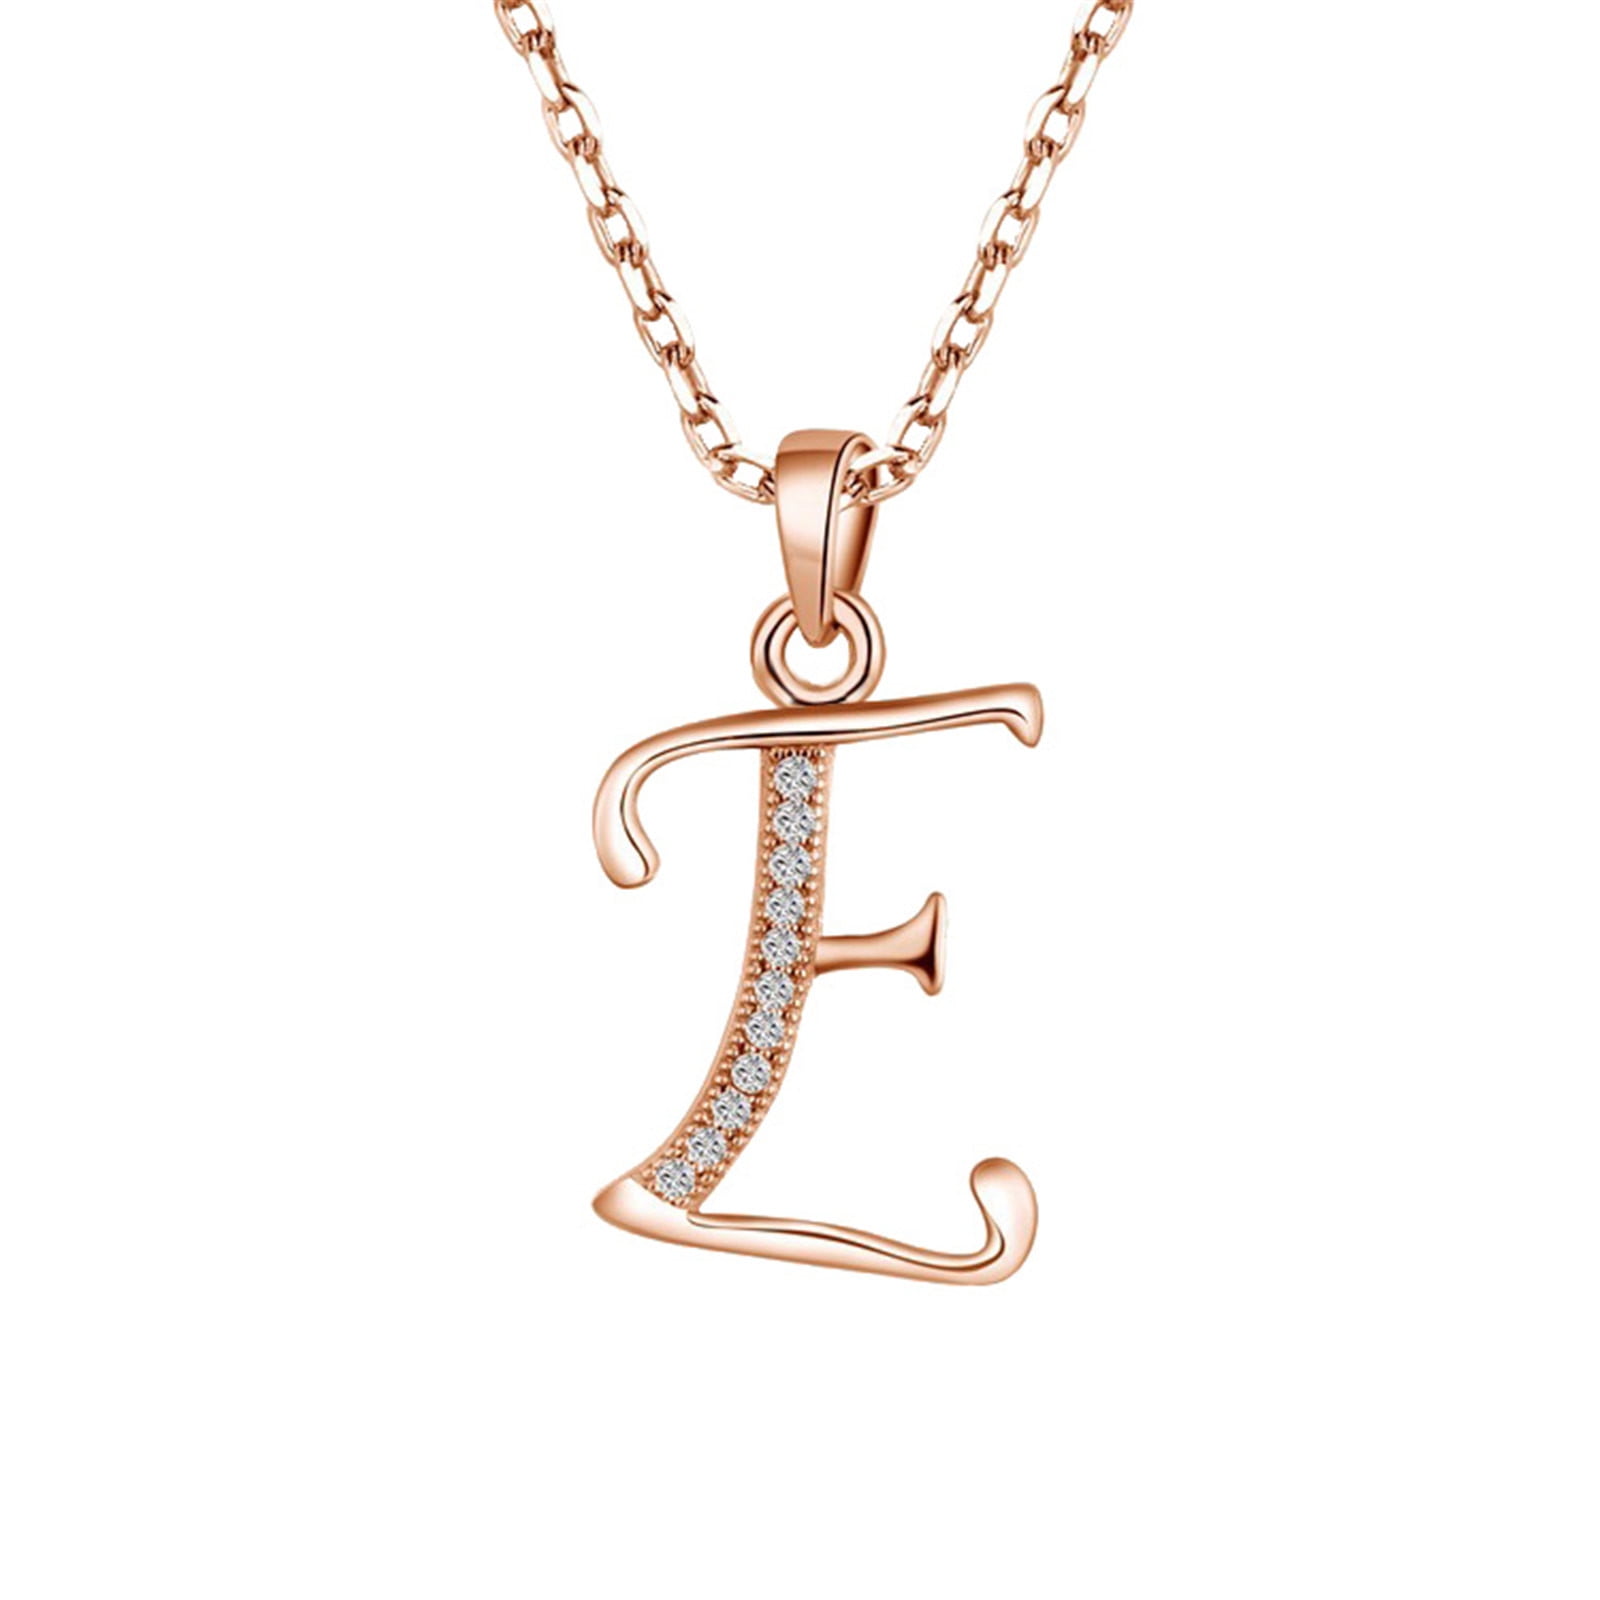 Customize Personalized Lucky Letter Combination Initial Clavicle Necklace Alphabet Charm Pendant Bridesmaid Jewelry for Women Girls